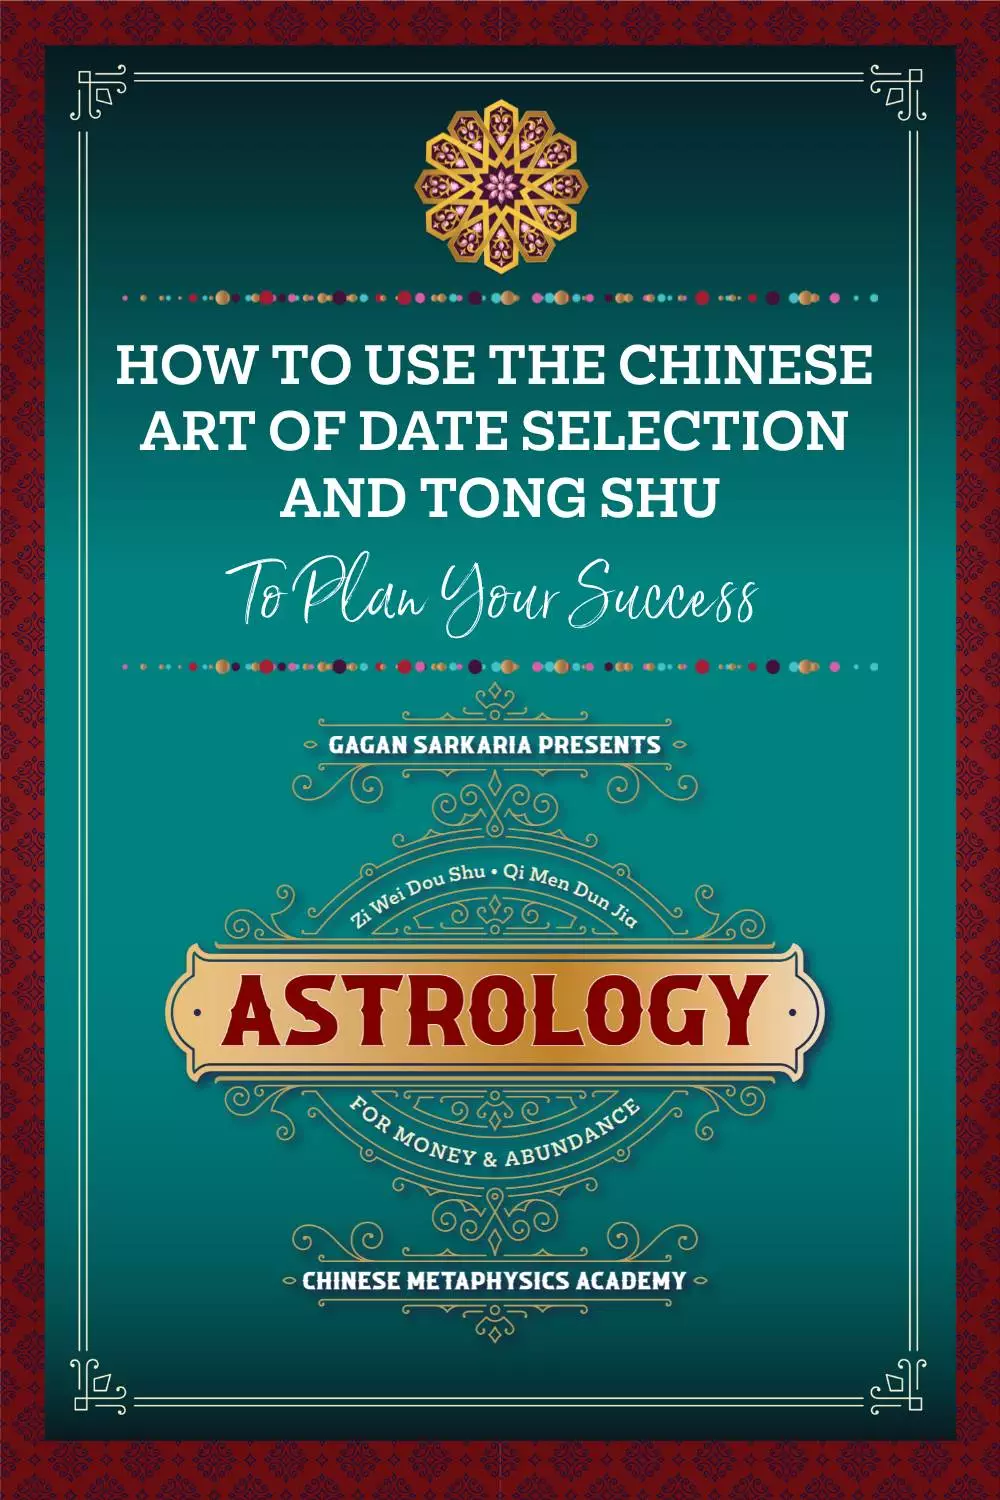 How to use the Chinese Art of Date Selection and Tong Shu to Plan Your Success